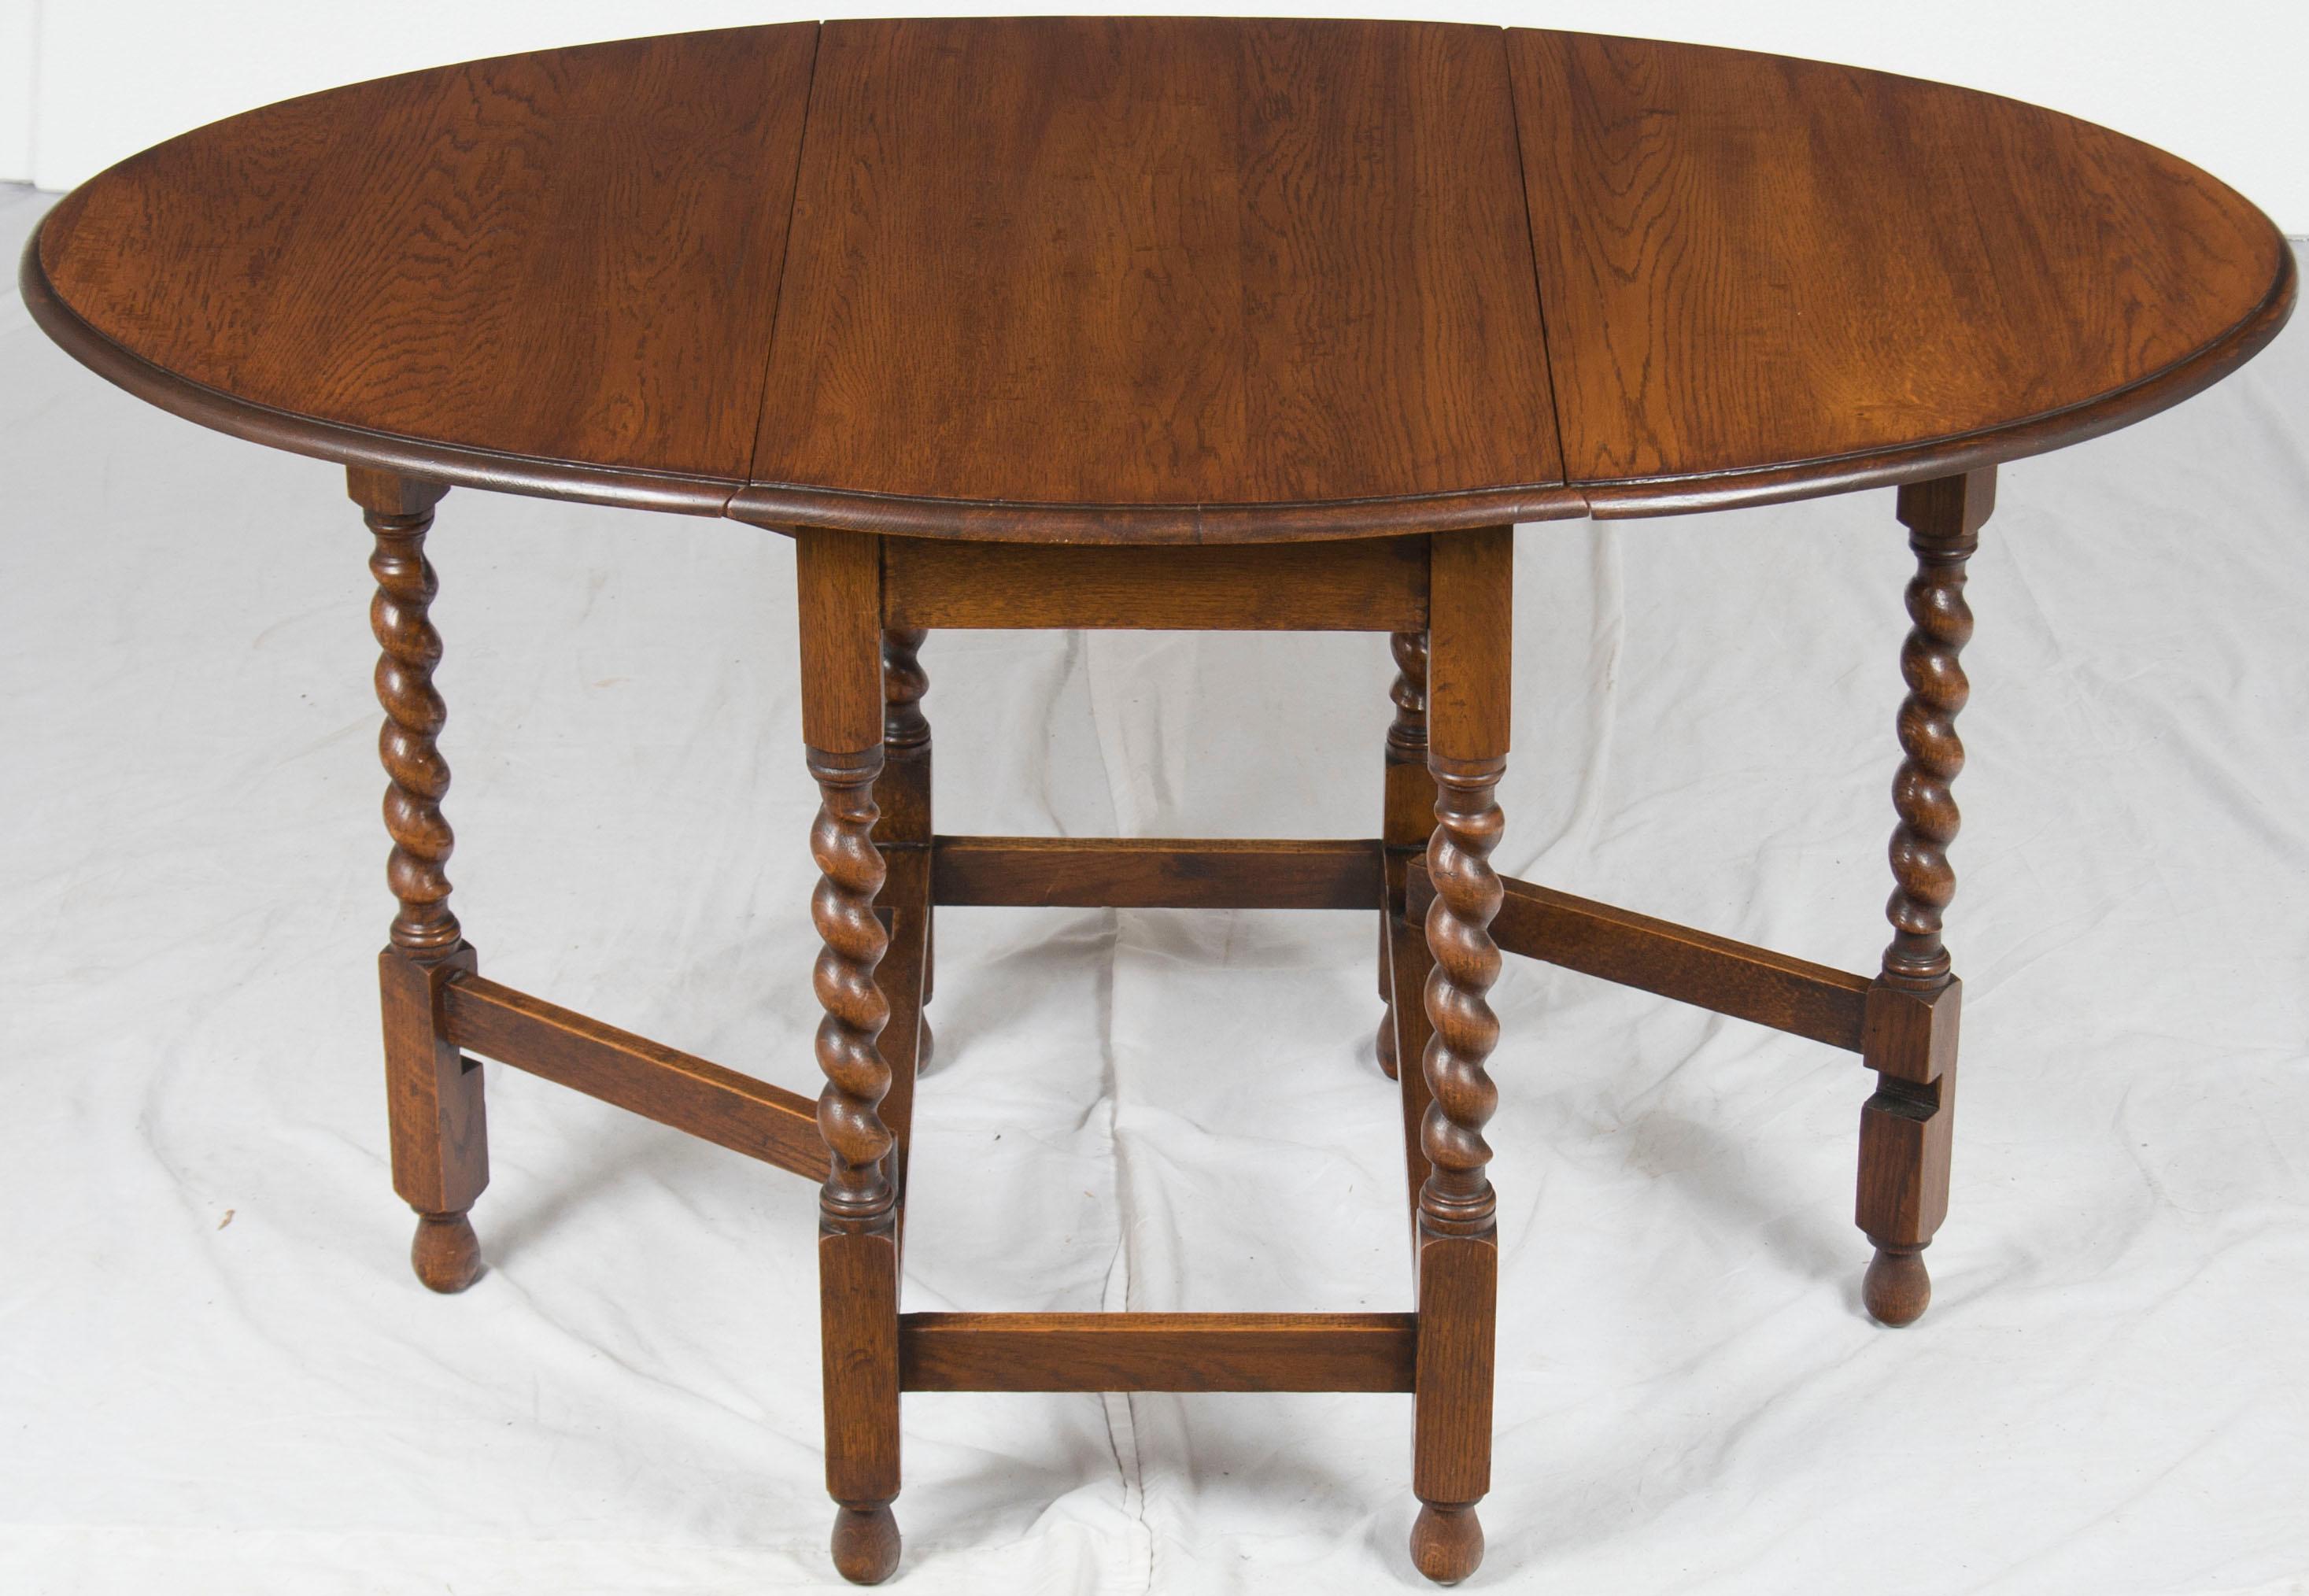 This oak gate leg table was made in England sometime, circa 1920. Gate leg tables are quite flexible in their use and fit a wide range of needs. Use then with one leaf open, both, or neither. This flexibility allows a table to be stored to the side